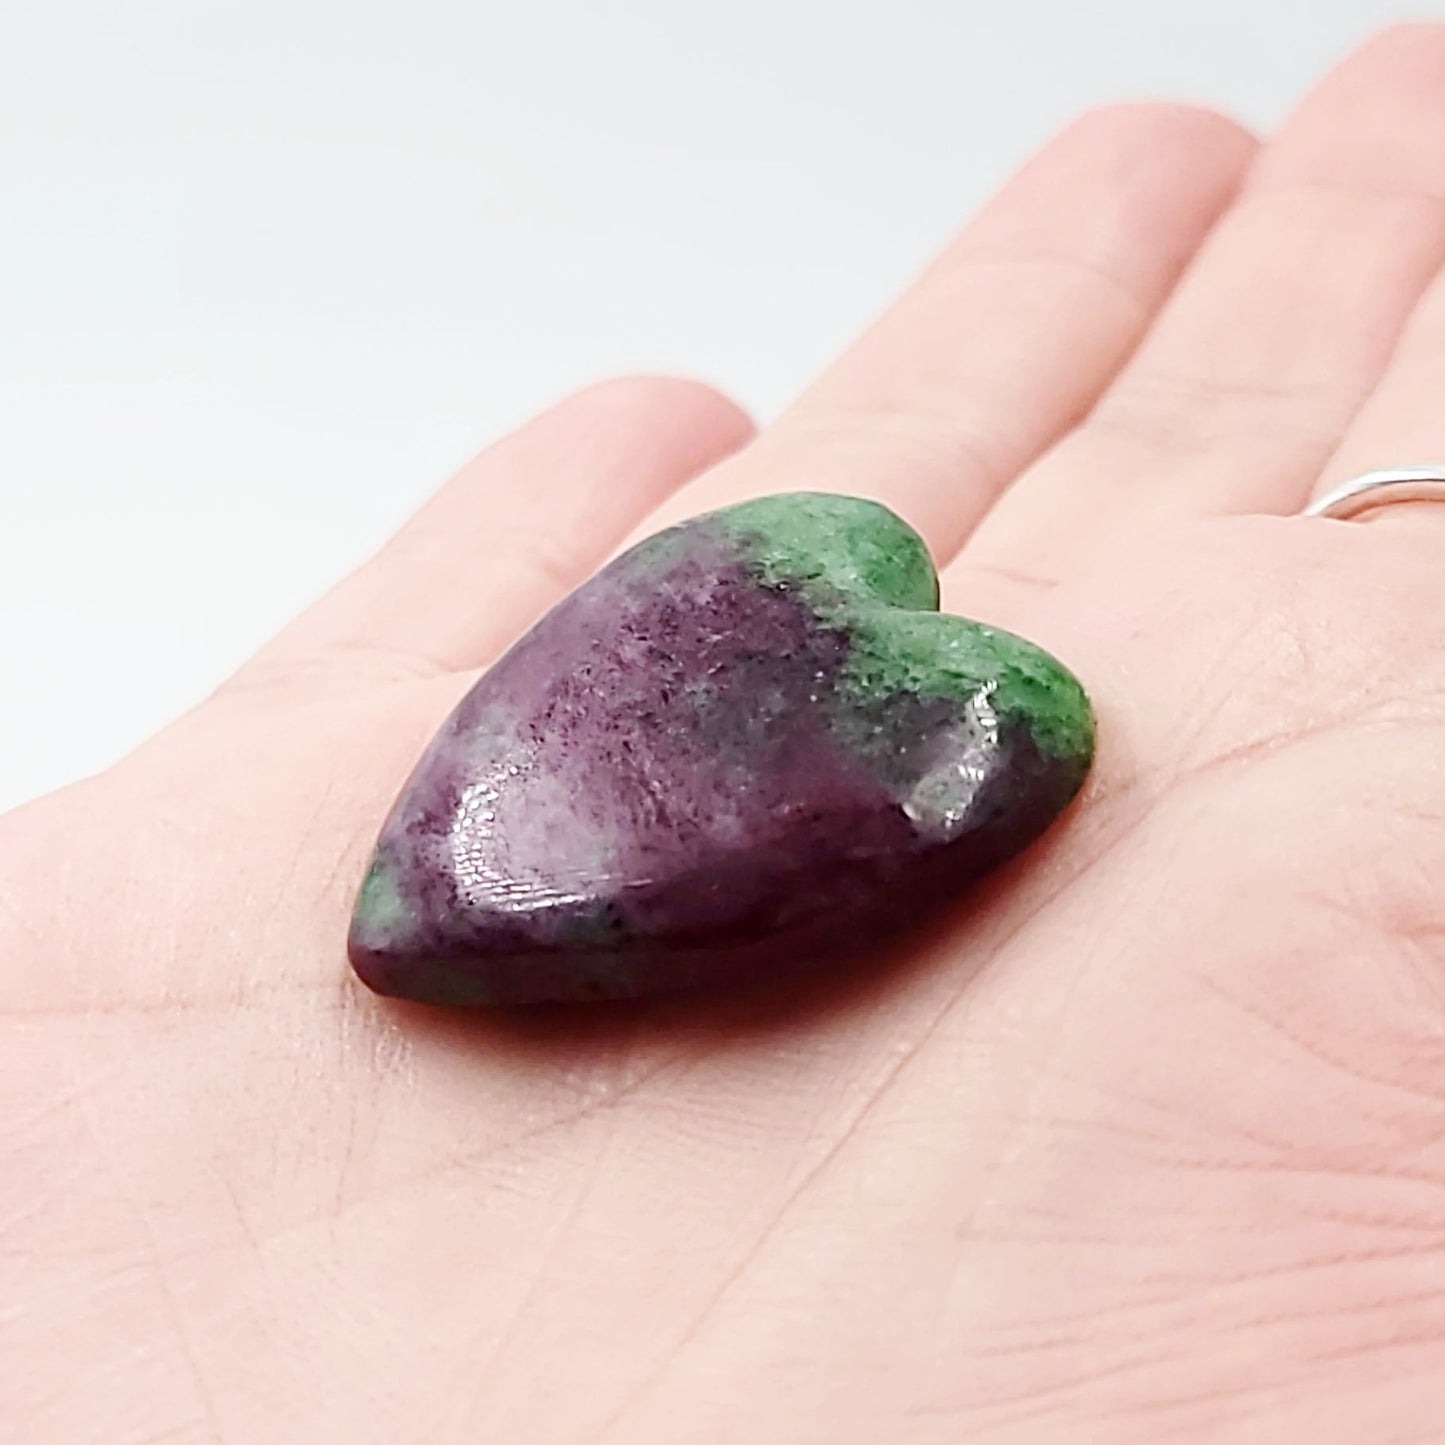 Ruby Zoisite Cabochon Heart Polished Cut Stone - Elevated Metaphysical